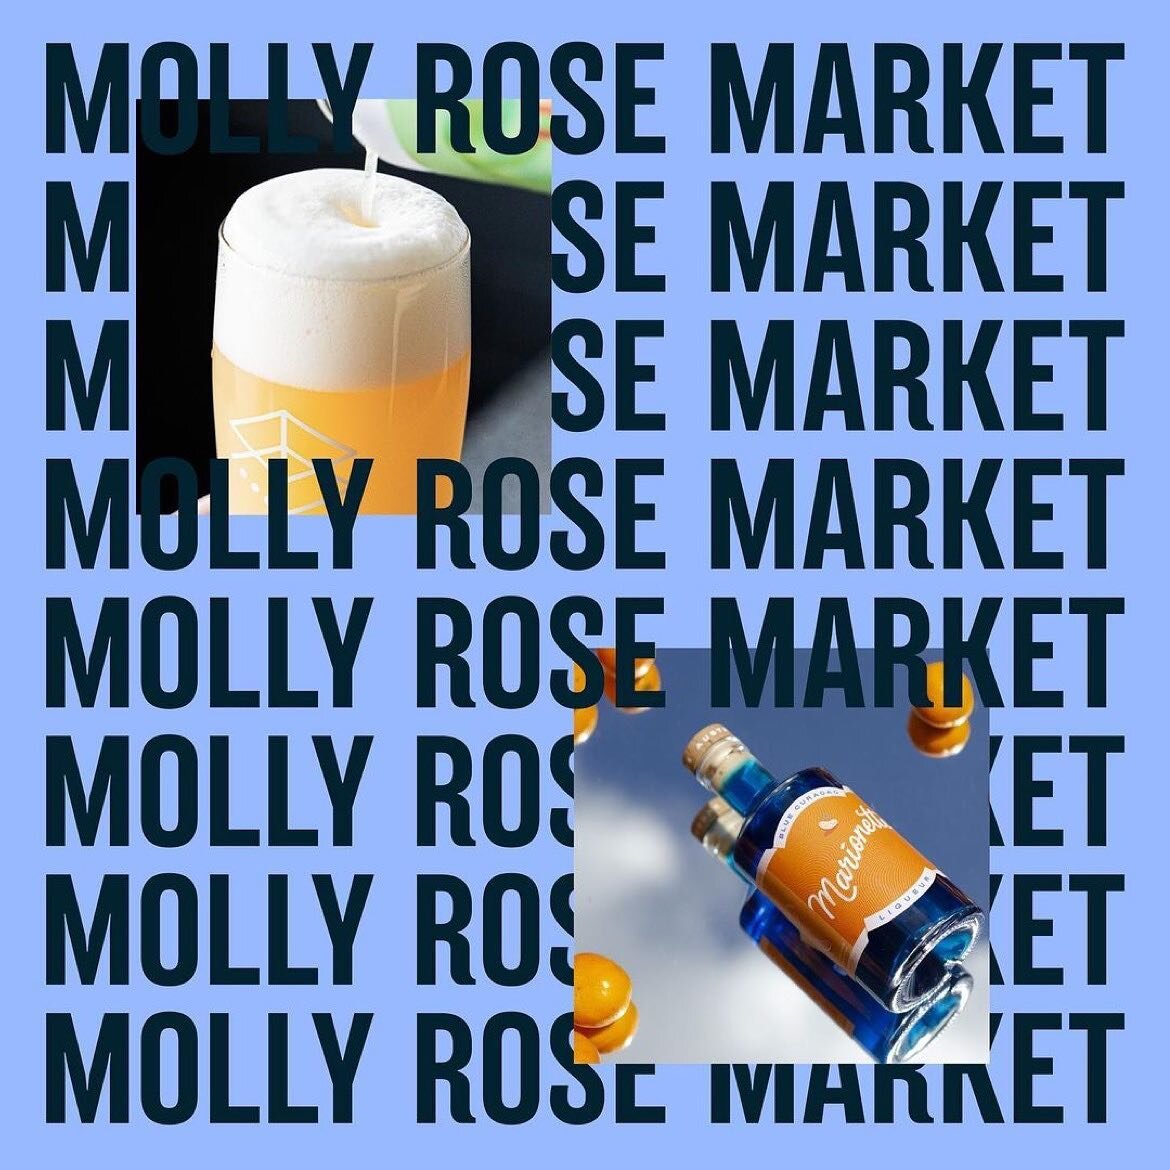 Yet to check out the Renos at @mollyrosebrewing ???

Join us at their July Market 
&bull;
JULY BOOZE MARKET
Sunday 09.07.23, 12 PM - 4 PM

What better way to get through these long dark months of winter than with a Booze Market at Molly Rose.

Come m